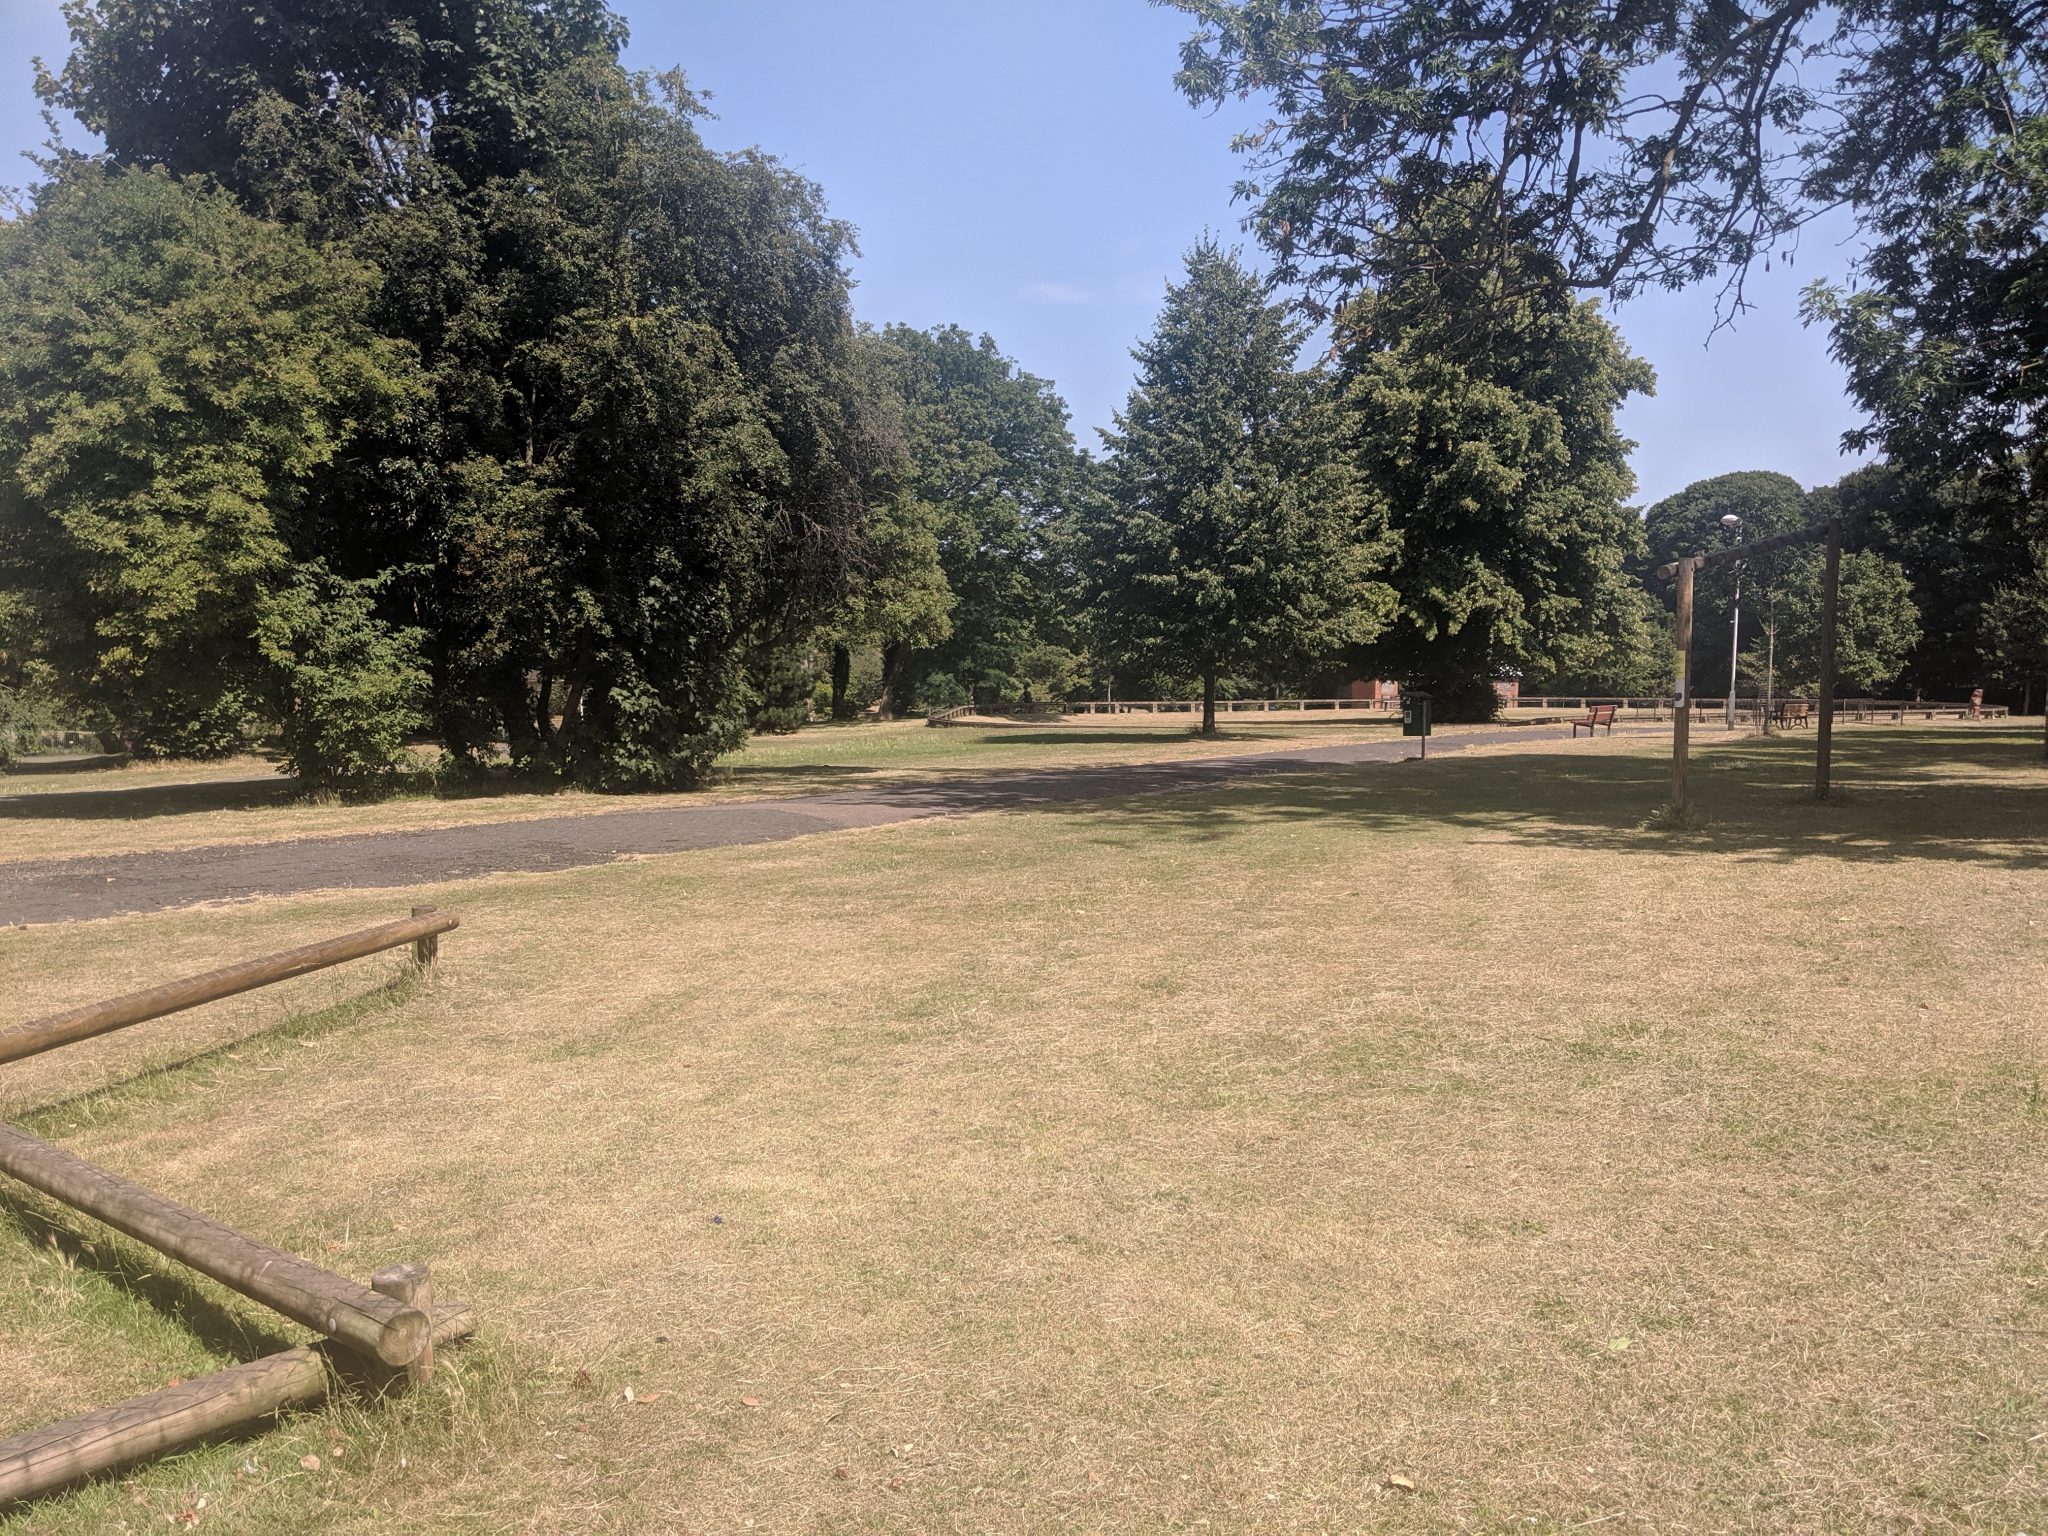 View of the green areas at Ellington Park